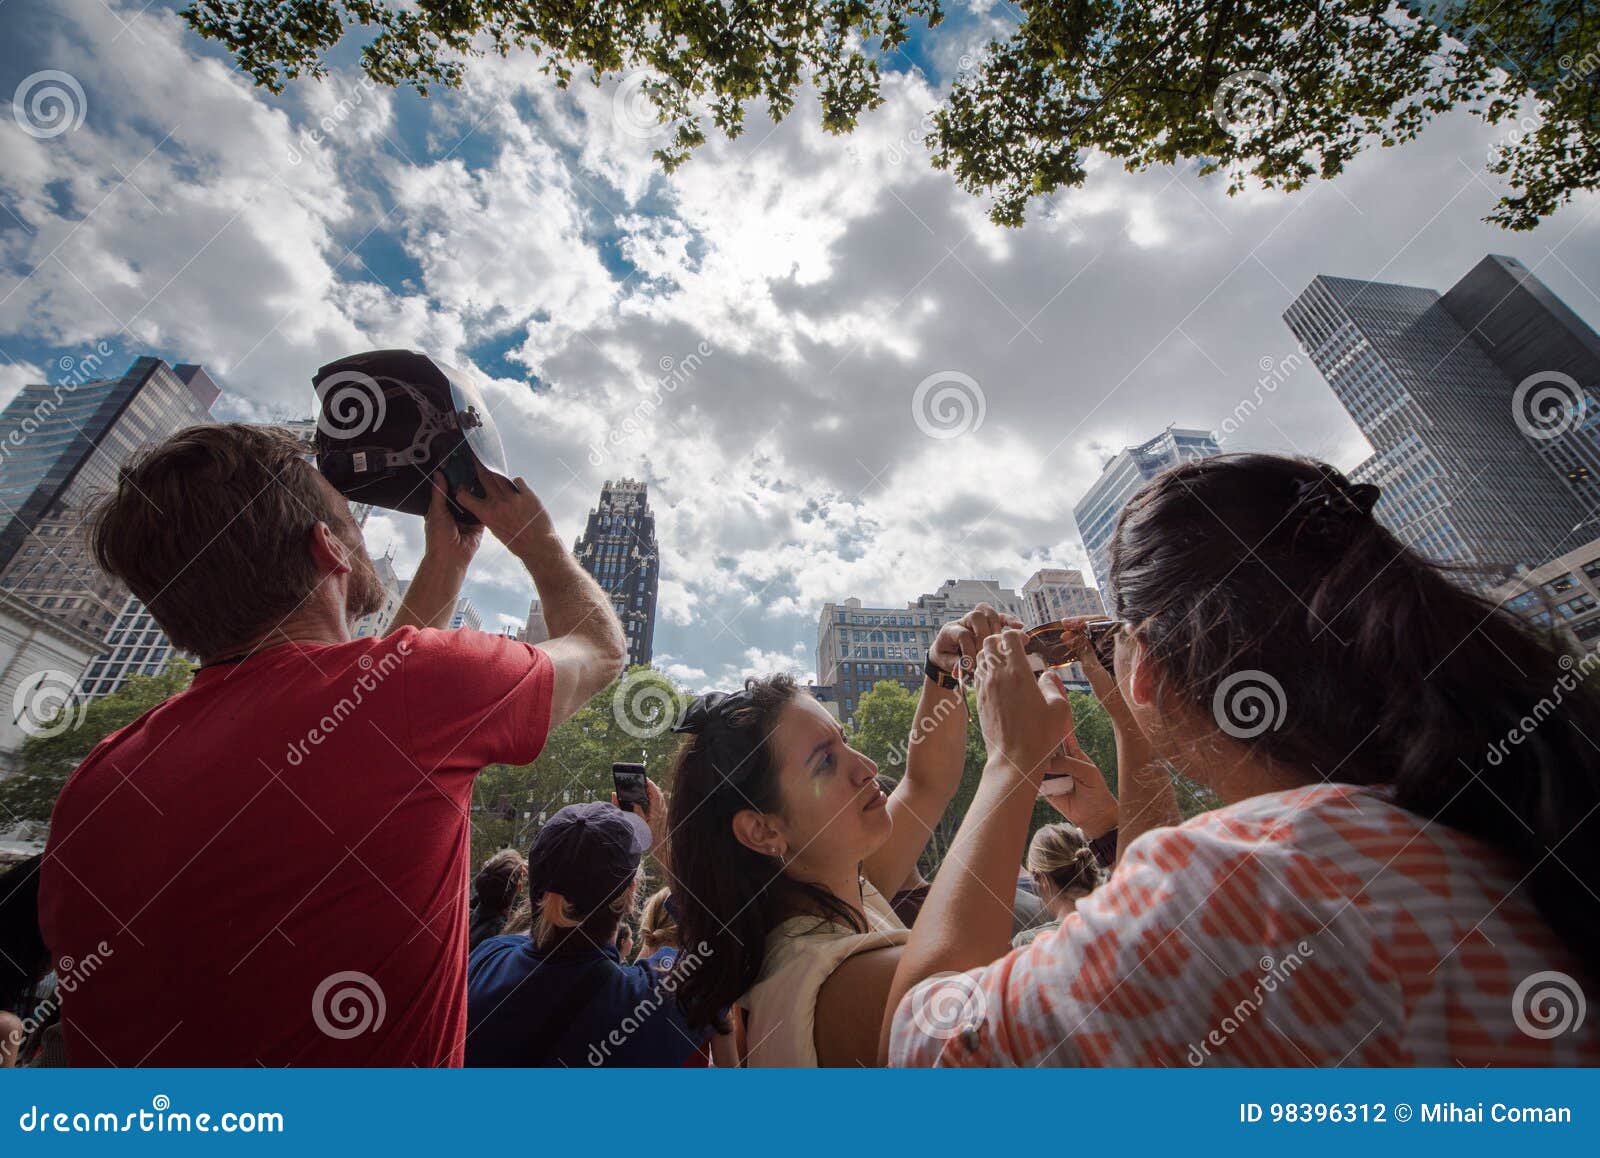 Crowd Looking Up At 2017 Eclipse In New York City ...